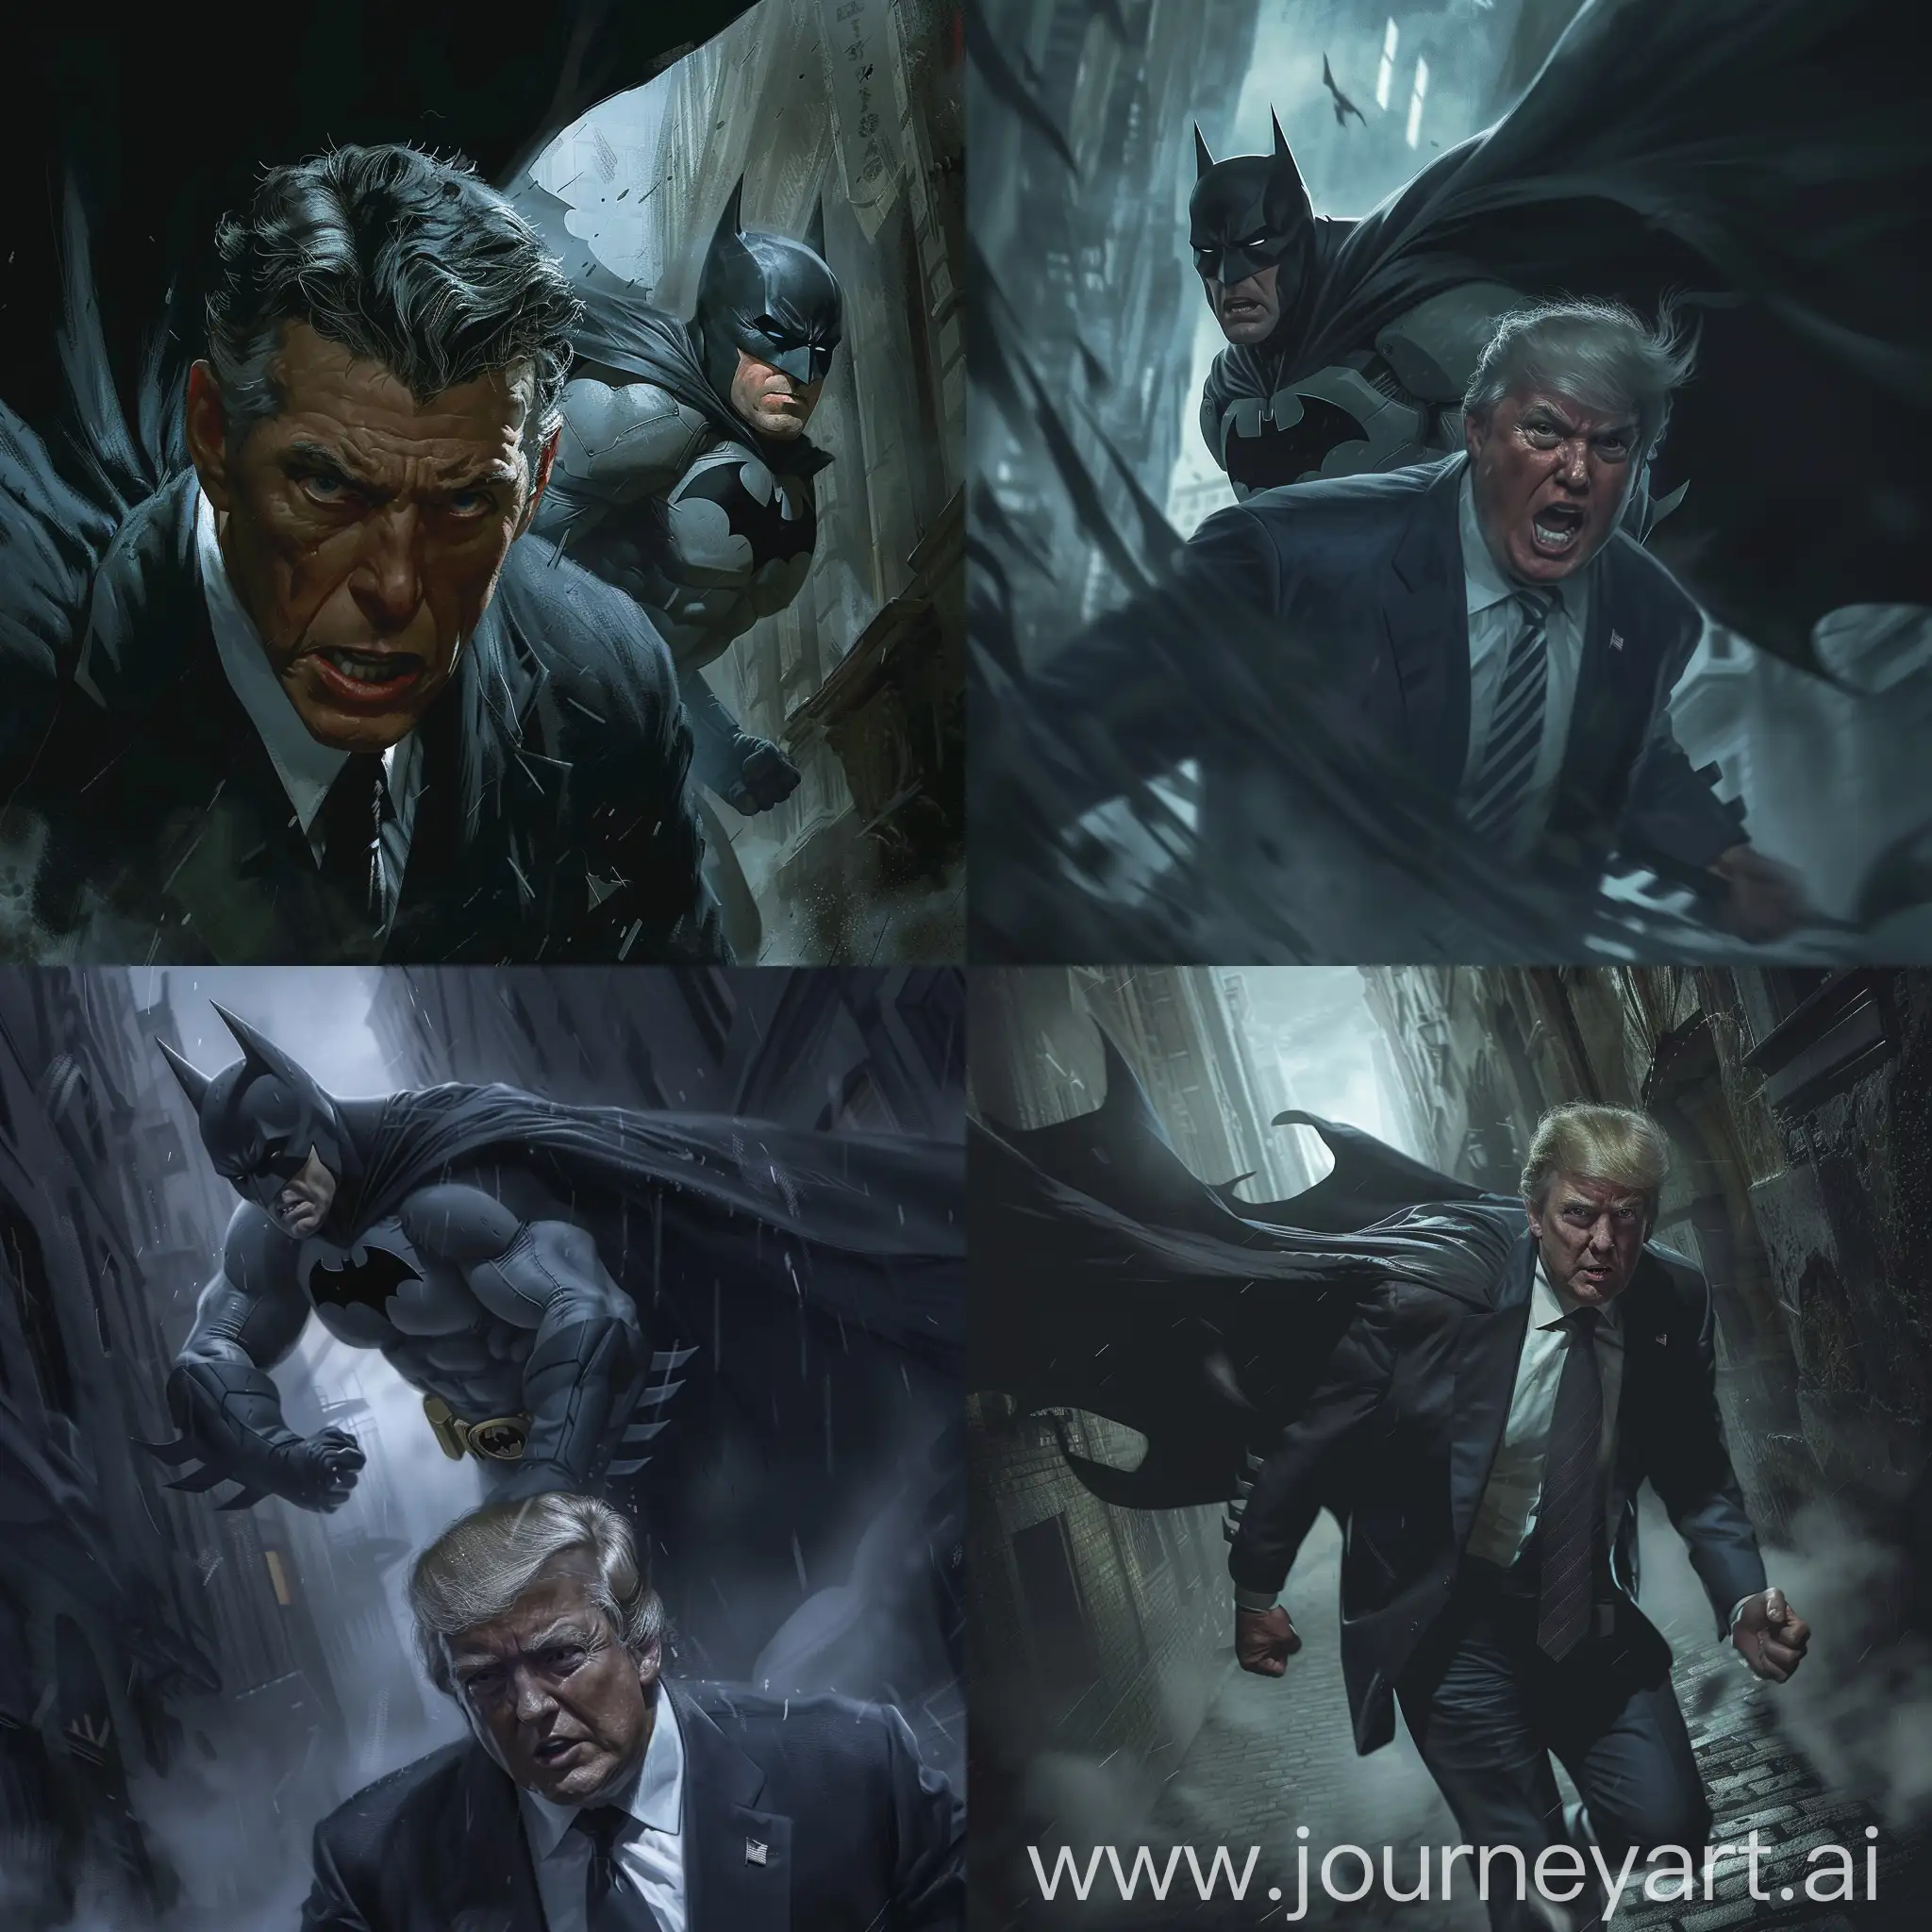 On a dark and foggy night, he, the well-known politician and entrepreneur who had served as the President of the United States, was panting heavily as he navigated through the narrow, winding alleys of the city, glancing over his shoulder. The sound of Batman's cape flapping in the wind could be heard. His controversial views and direct behavior no longer mattered at this moment, as his sole aim was to escape from the Dark Knight. With each step he took, Batman's long and terrifying shadows drew closer. The policies he once focused on—national interests, strengthening the domestic economy, and immigration and foreign affairs—were now pushed to the back of his mind. All his attention was on escaping his relentless pursuer.